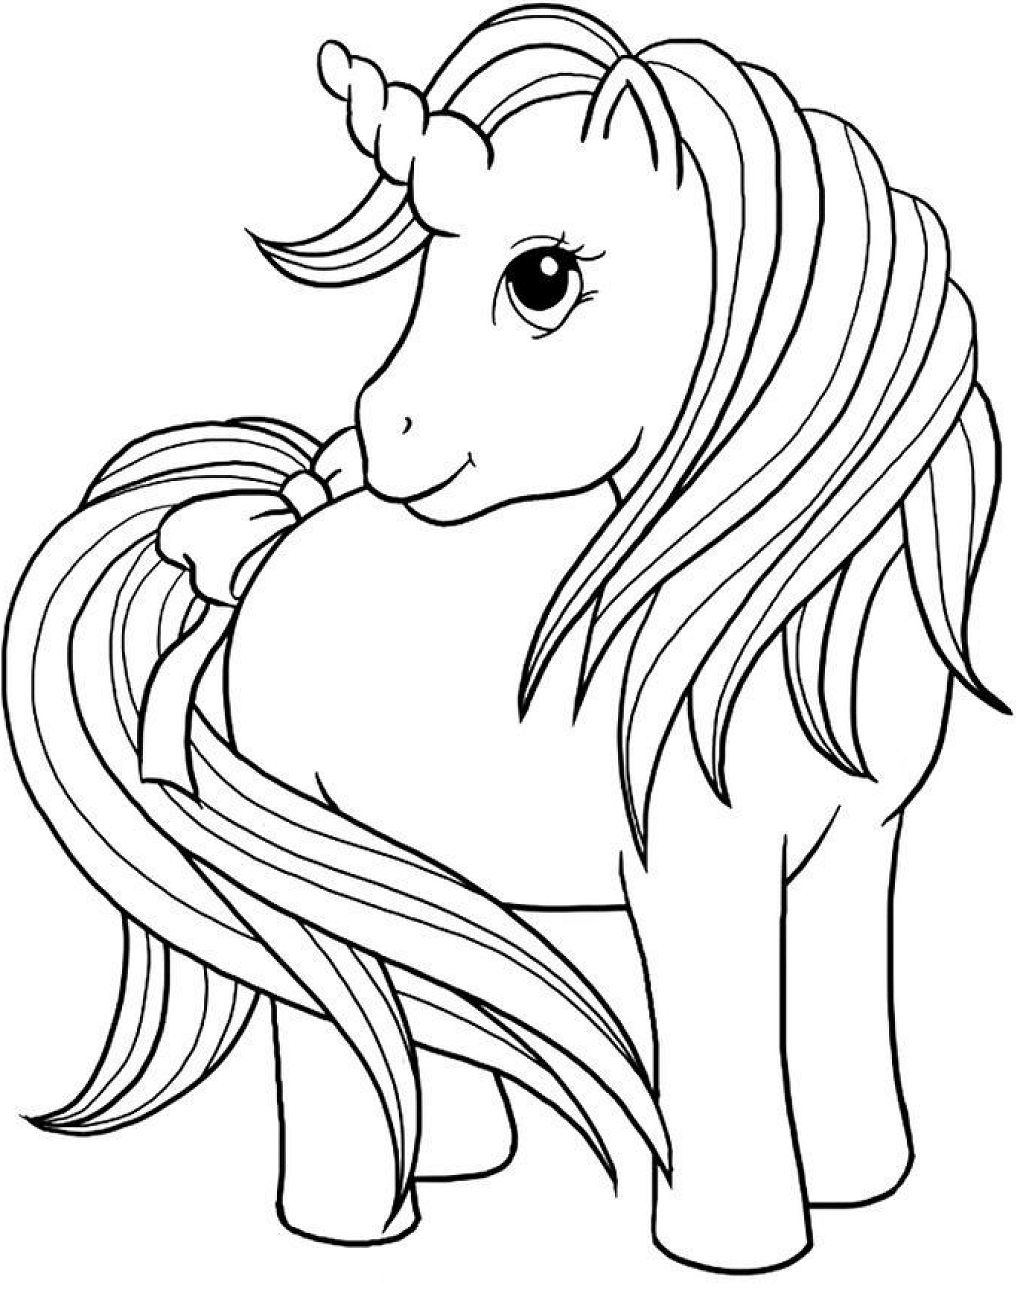 Unicorn With Bow At Tail Coloring Page